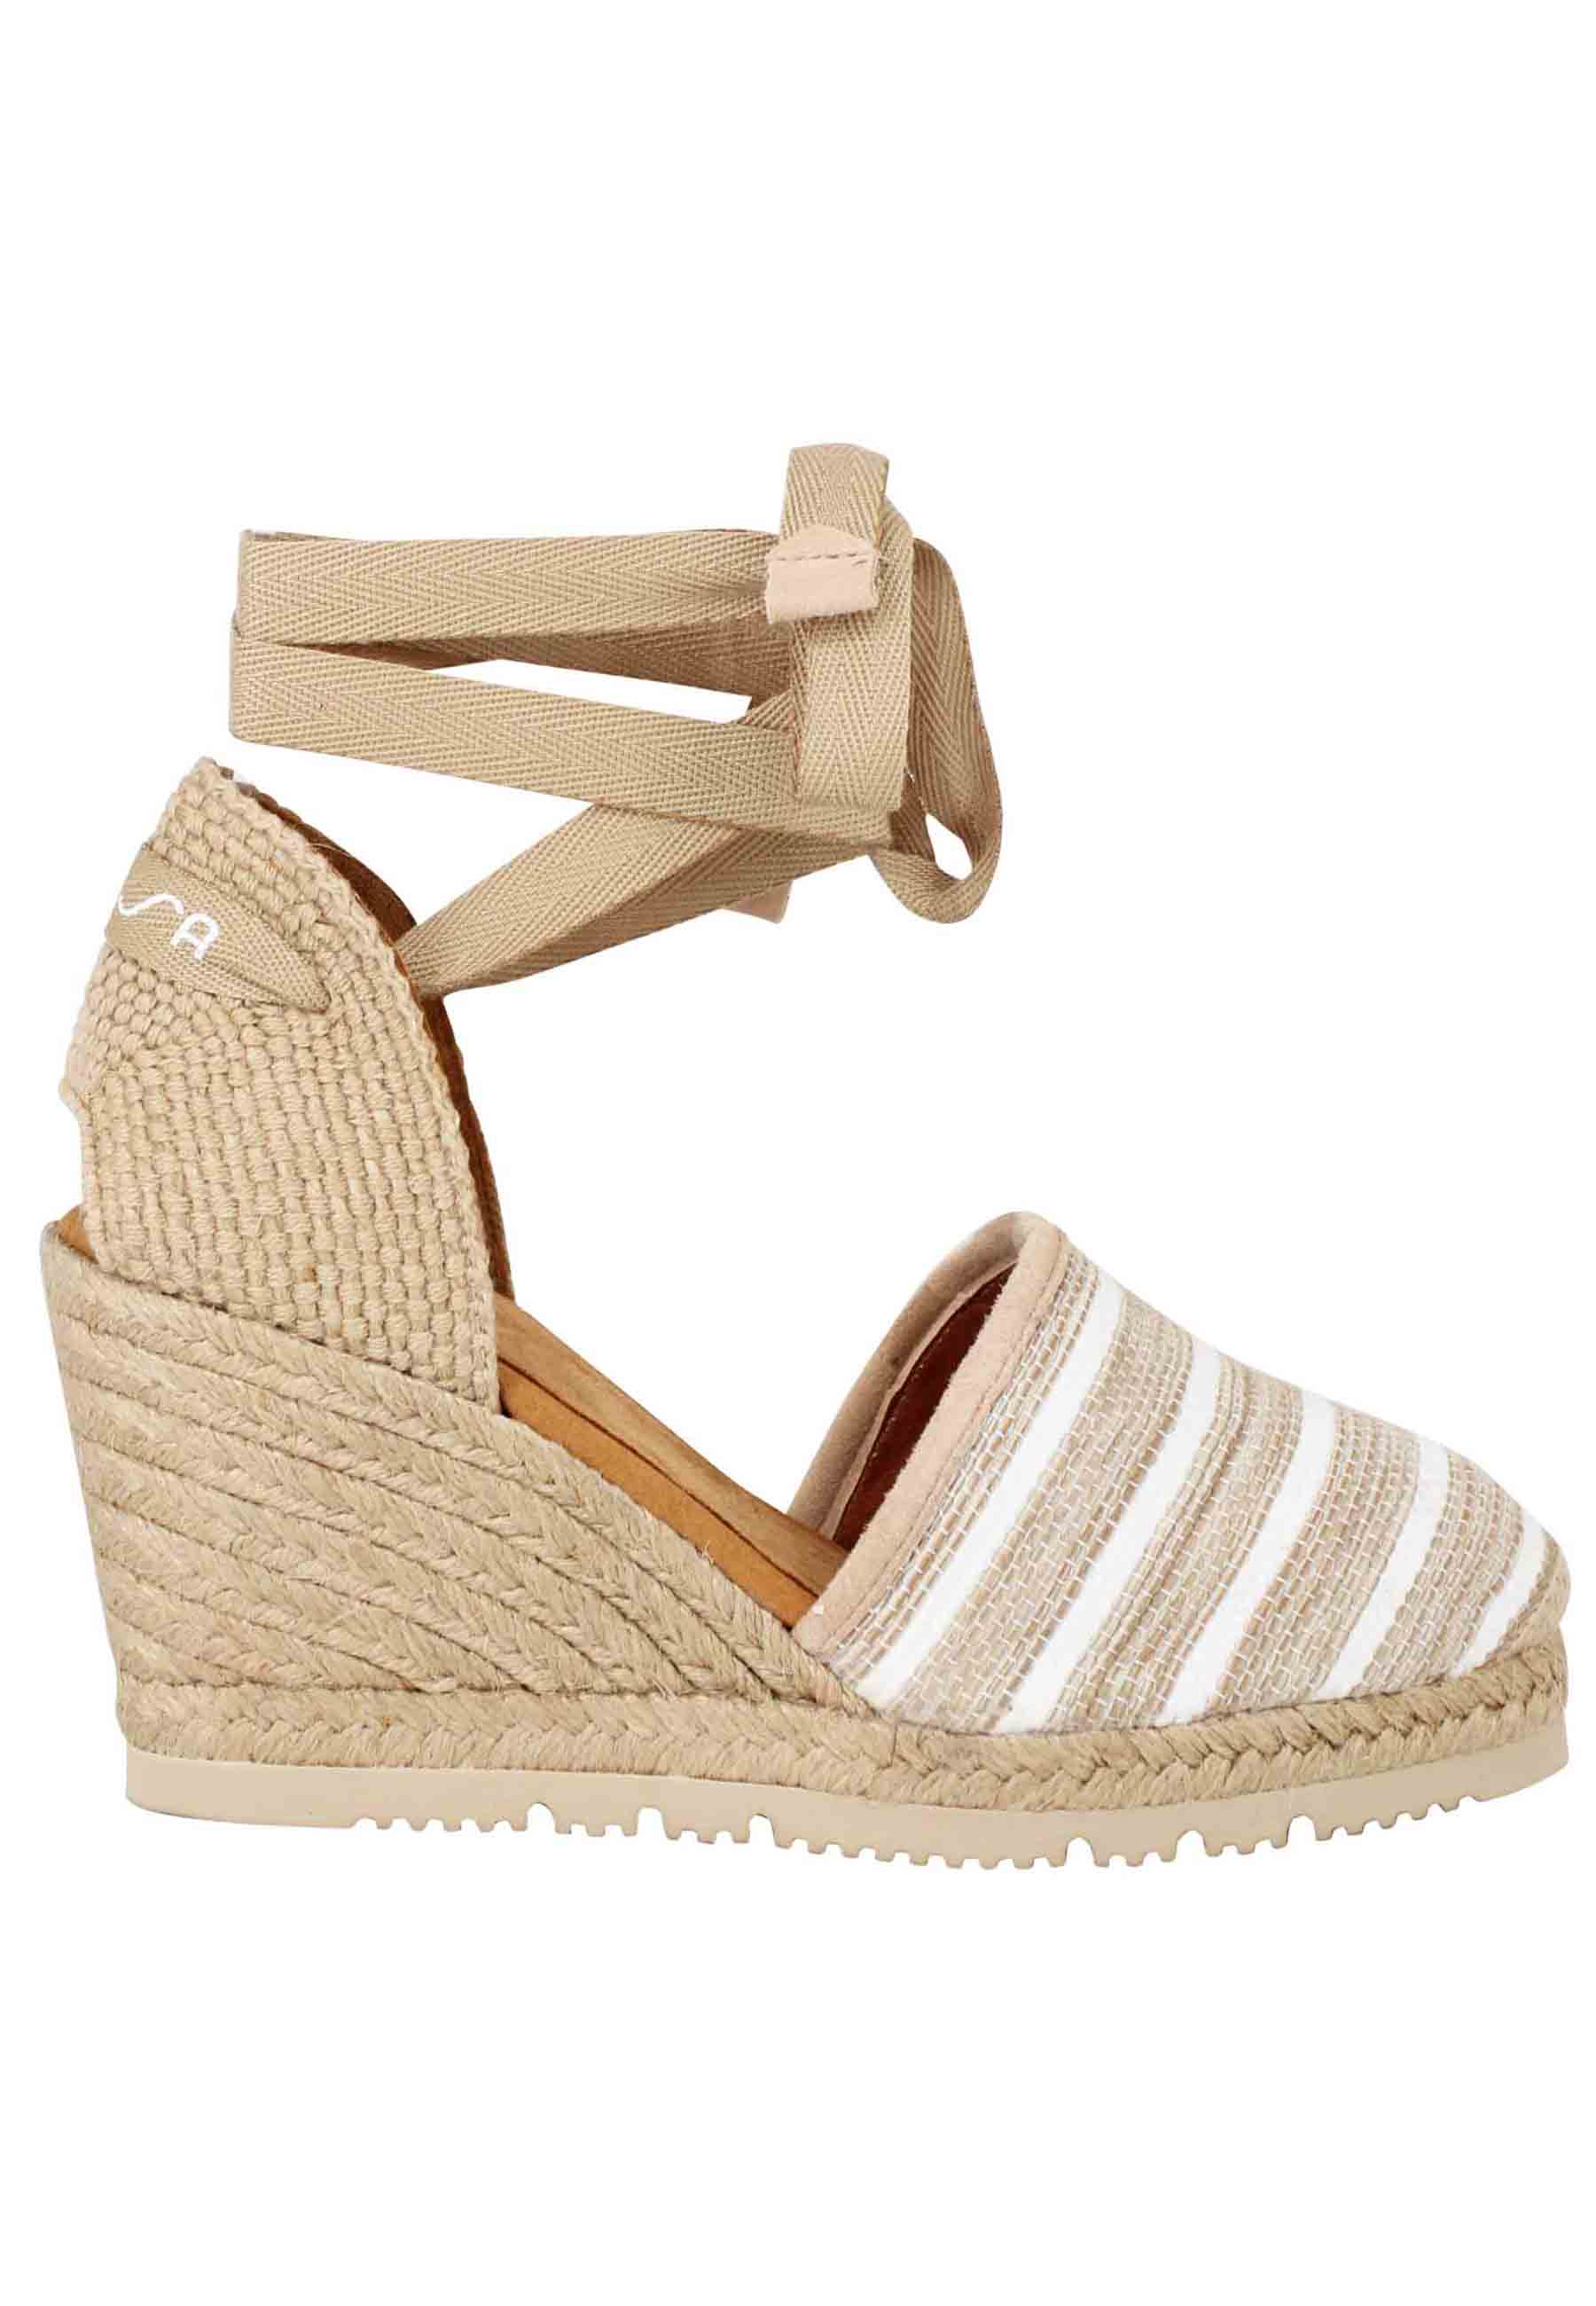 Women's espadrilles sandals in natural fabric with high rope wedge